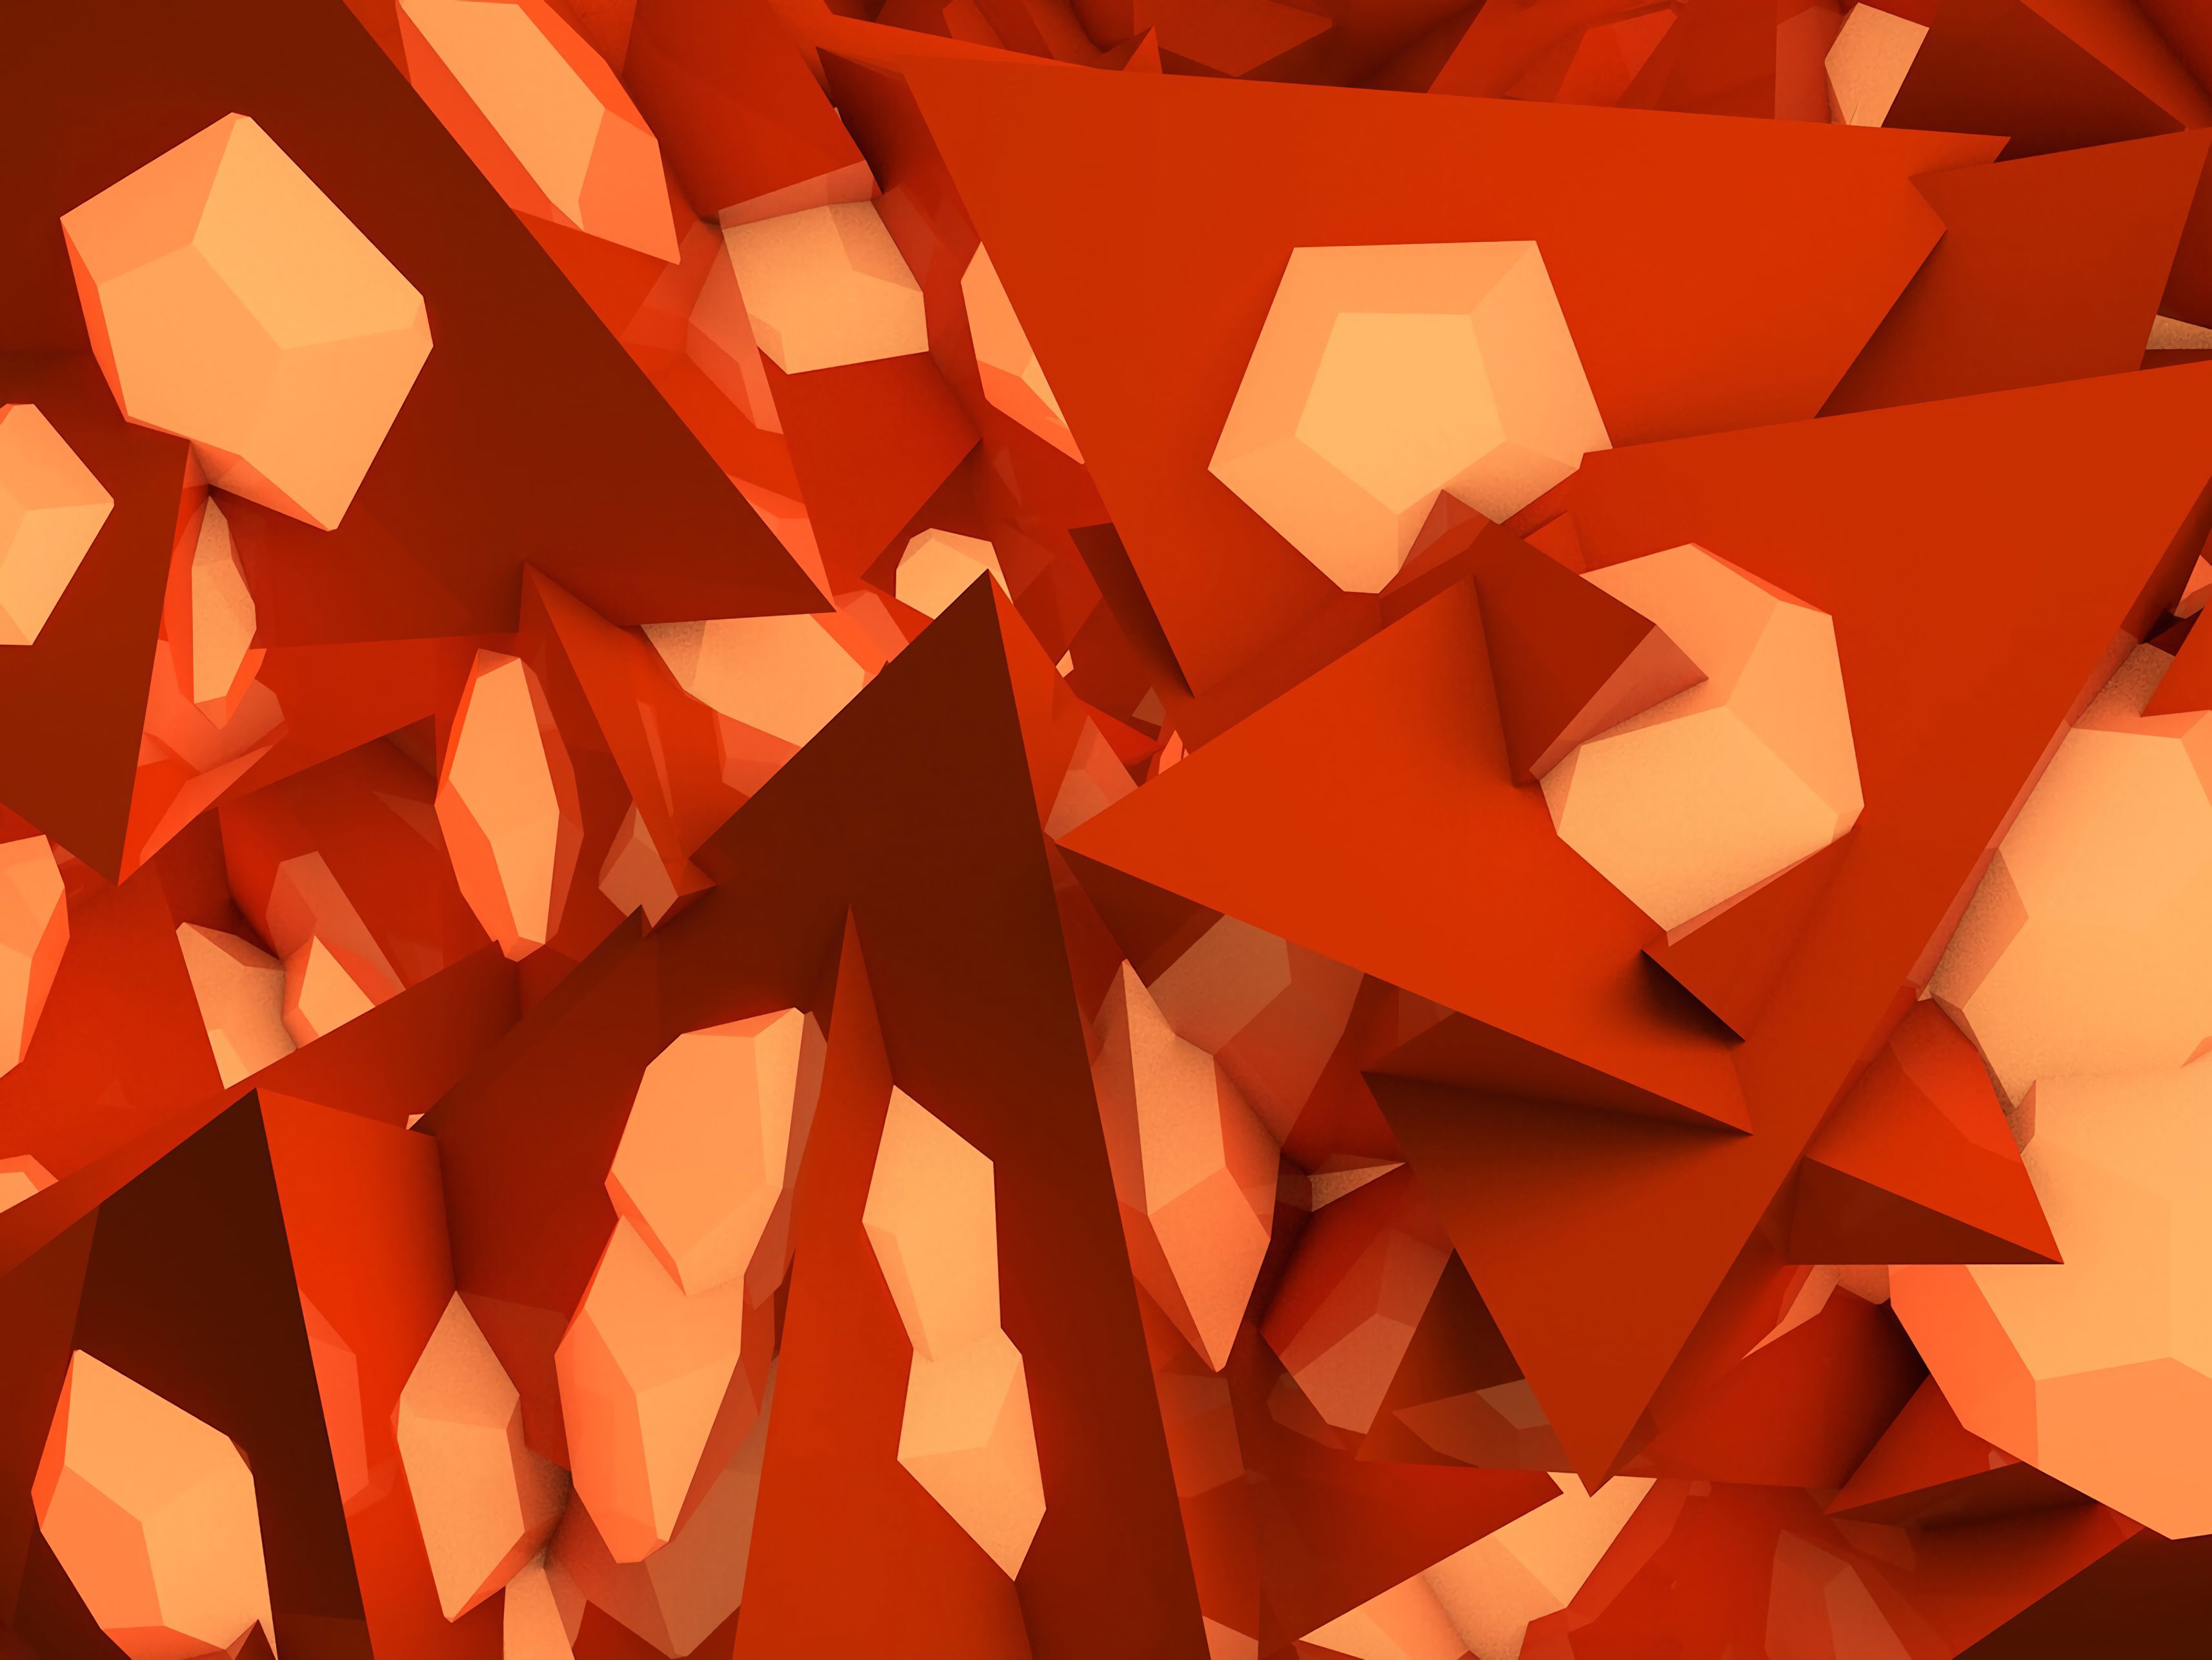 90461 2560x1080 PC pictures for free, download 3d, pyramids, facets, face 2560x1080 wallpapers on your desktop